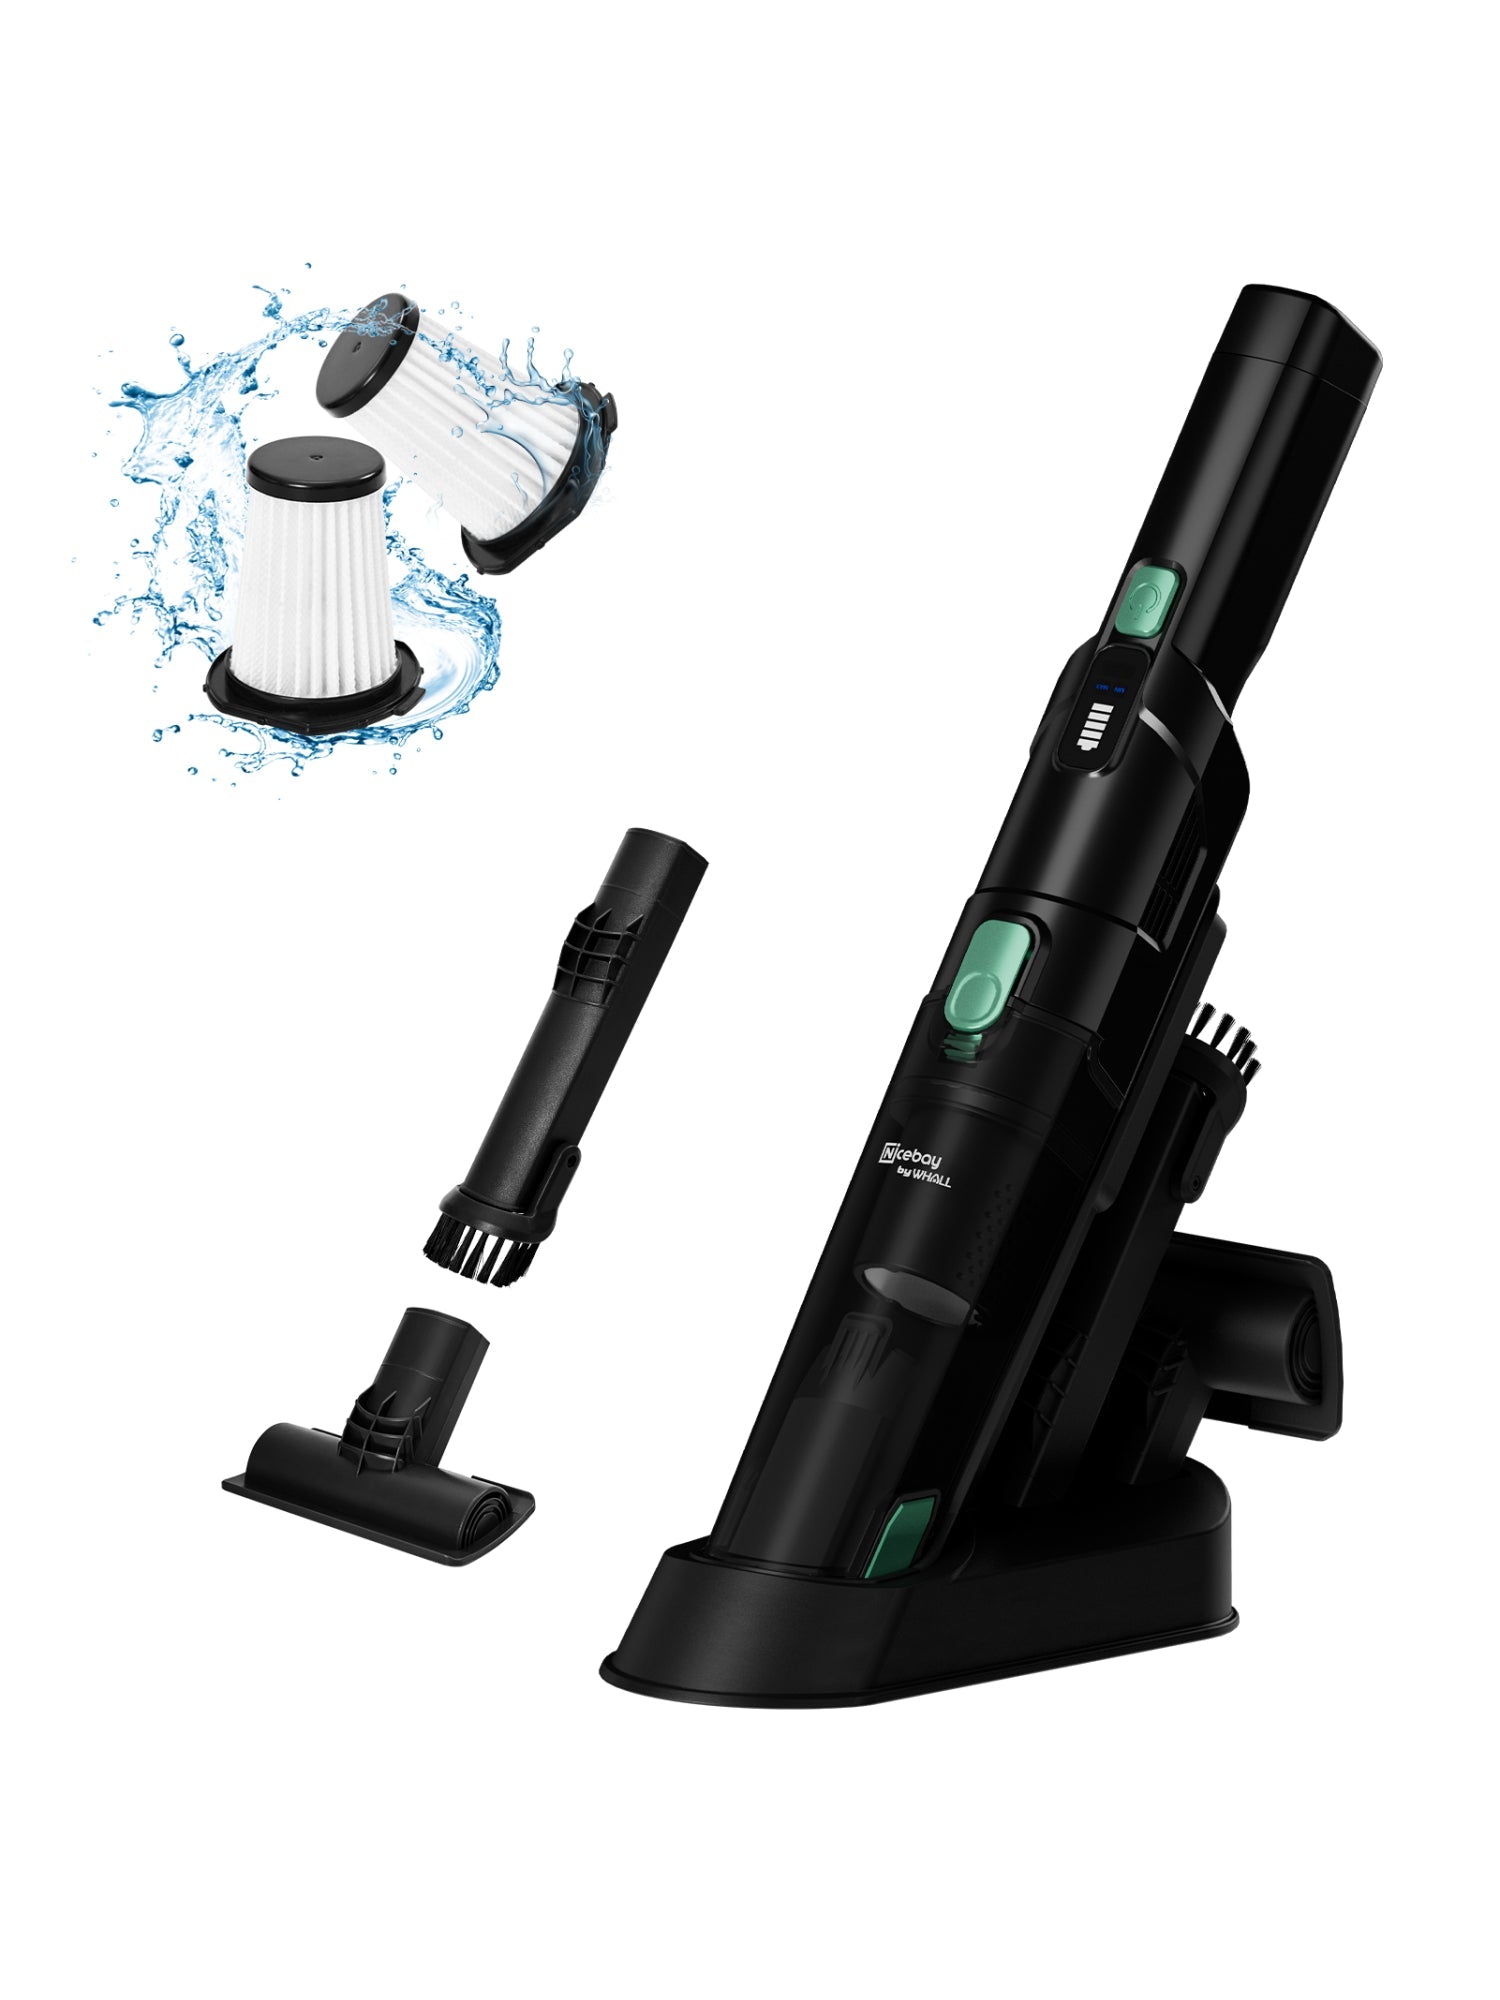 Whall Handheld Cordless Vacuum-Portable Vacuum with 15KPA Strong Suction, Fast Charging Dock, Lightweight